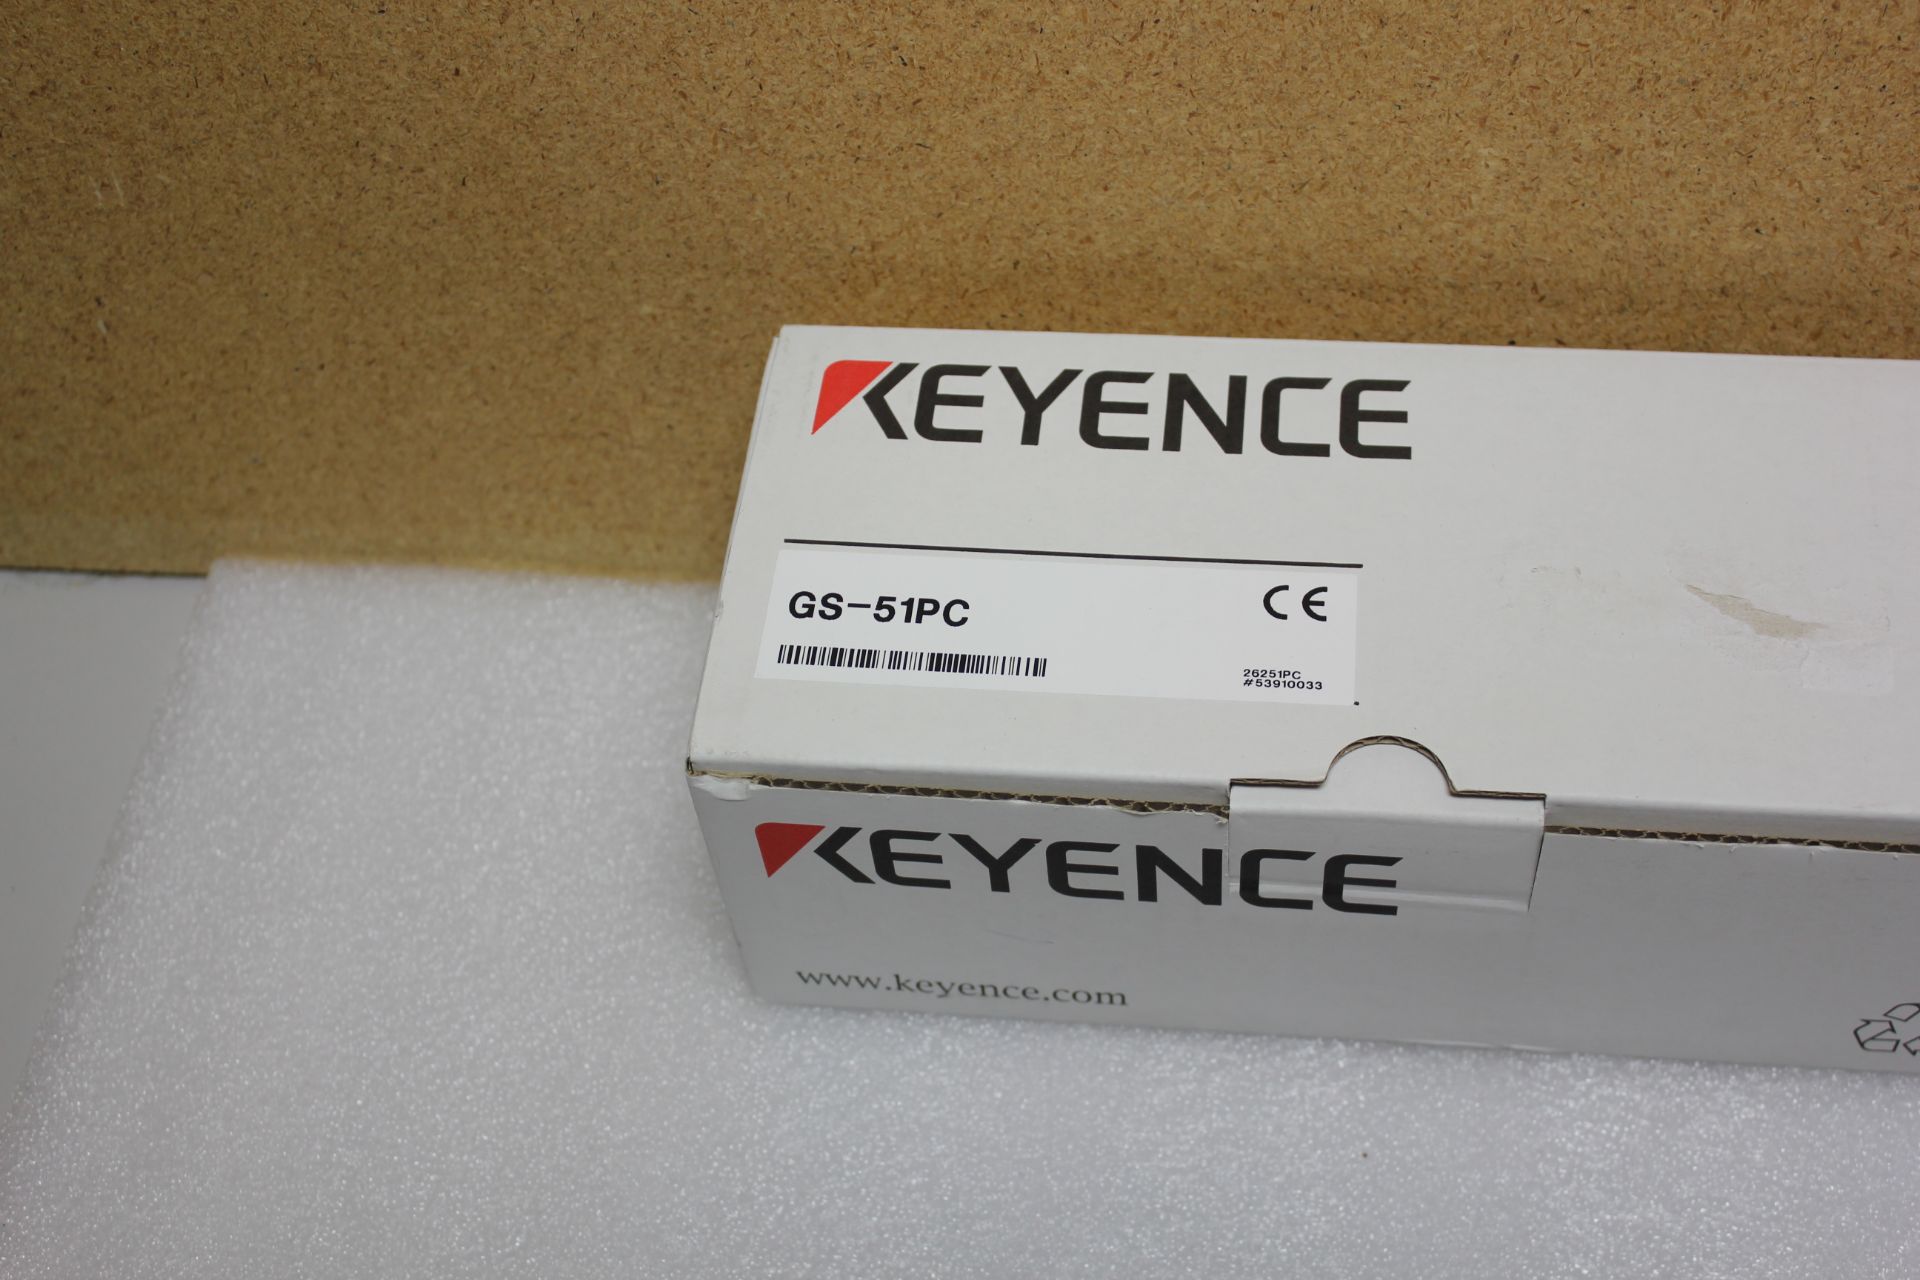 NEW KEYENCE SAFETY INTERLOCK SWITCH AND CABLE - Image 2 of 7